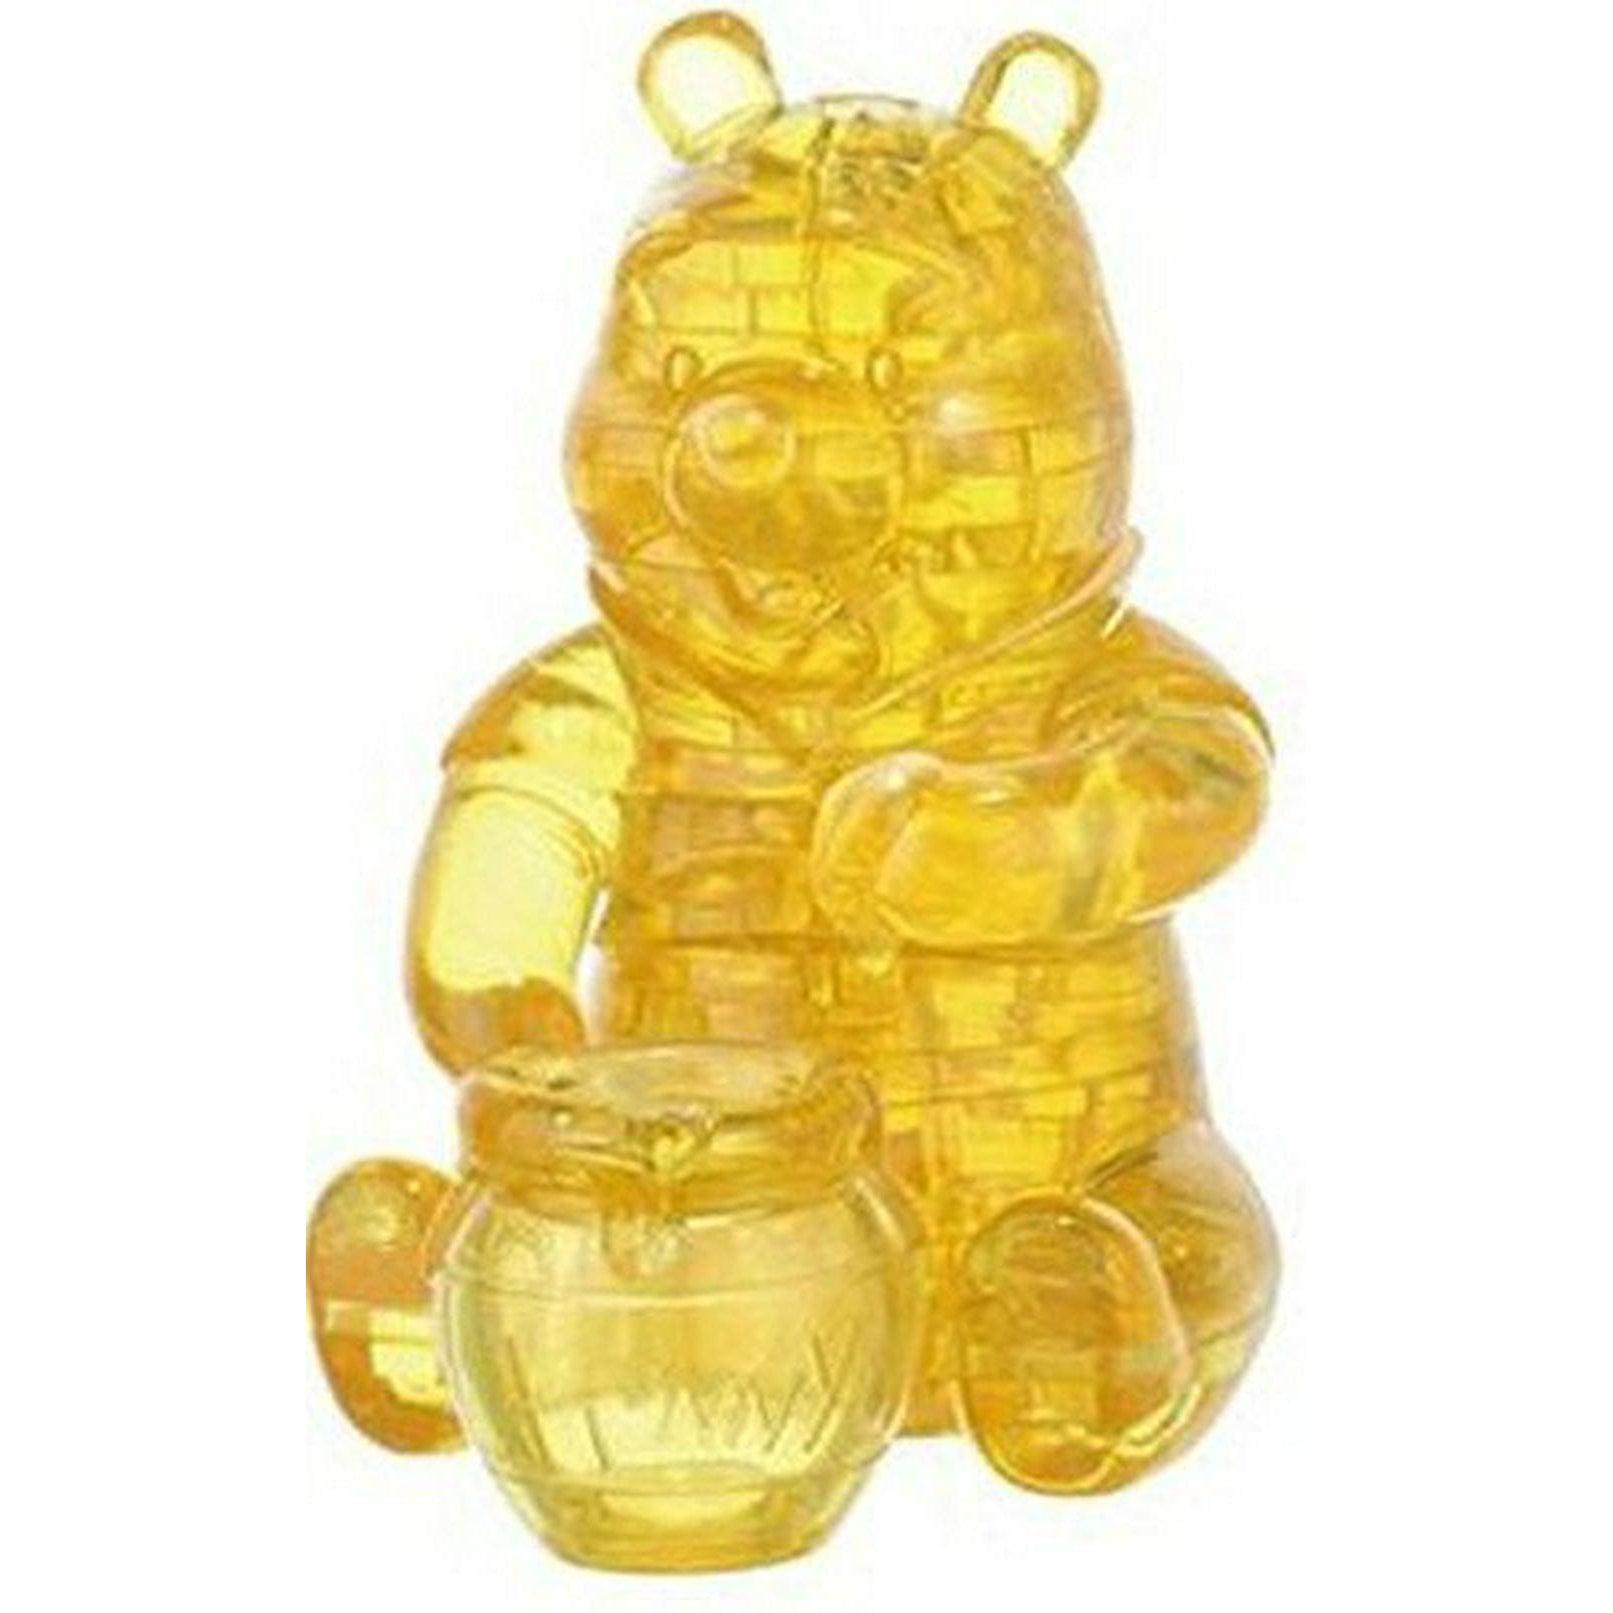 University Games-3D Disney Crystal Puzzle - Winnie the Pooh-30984-Legacy Toys